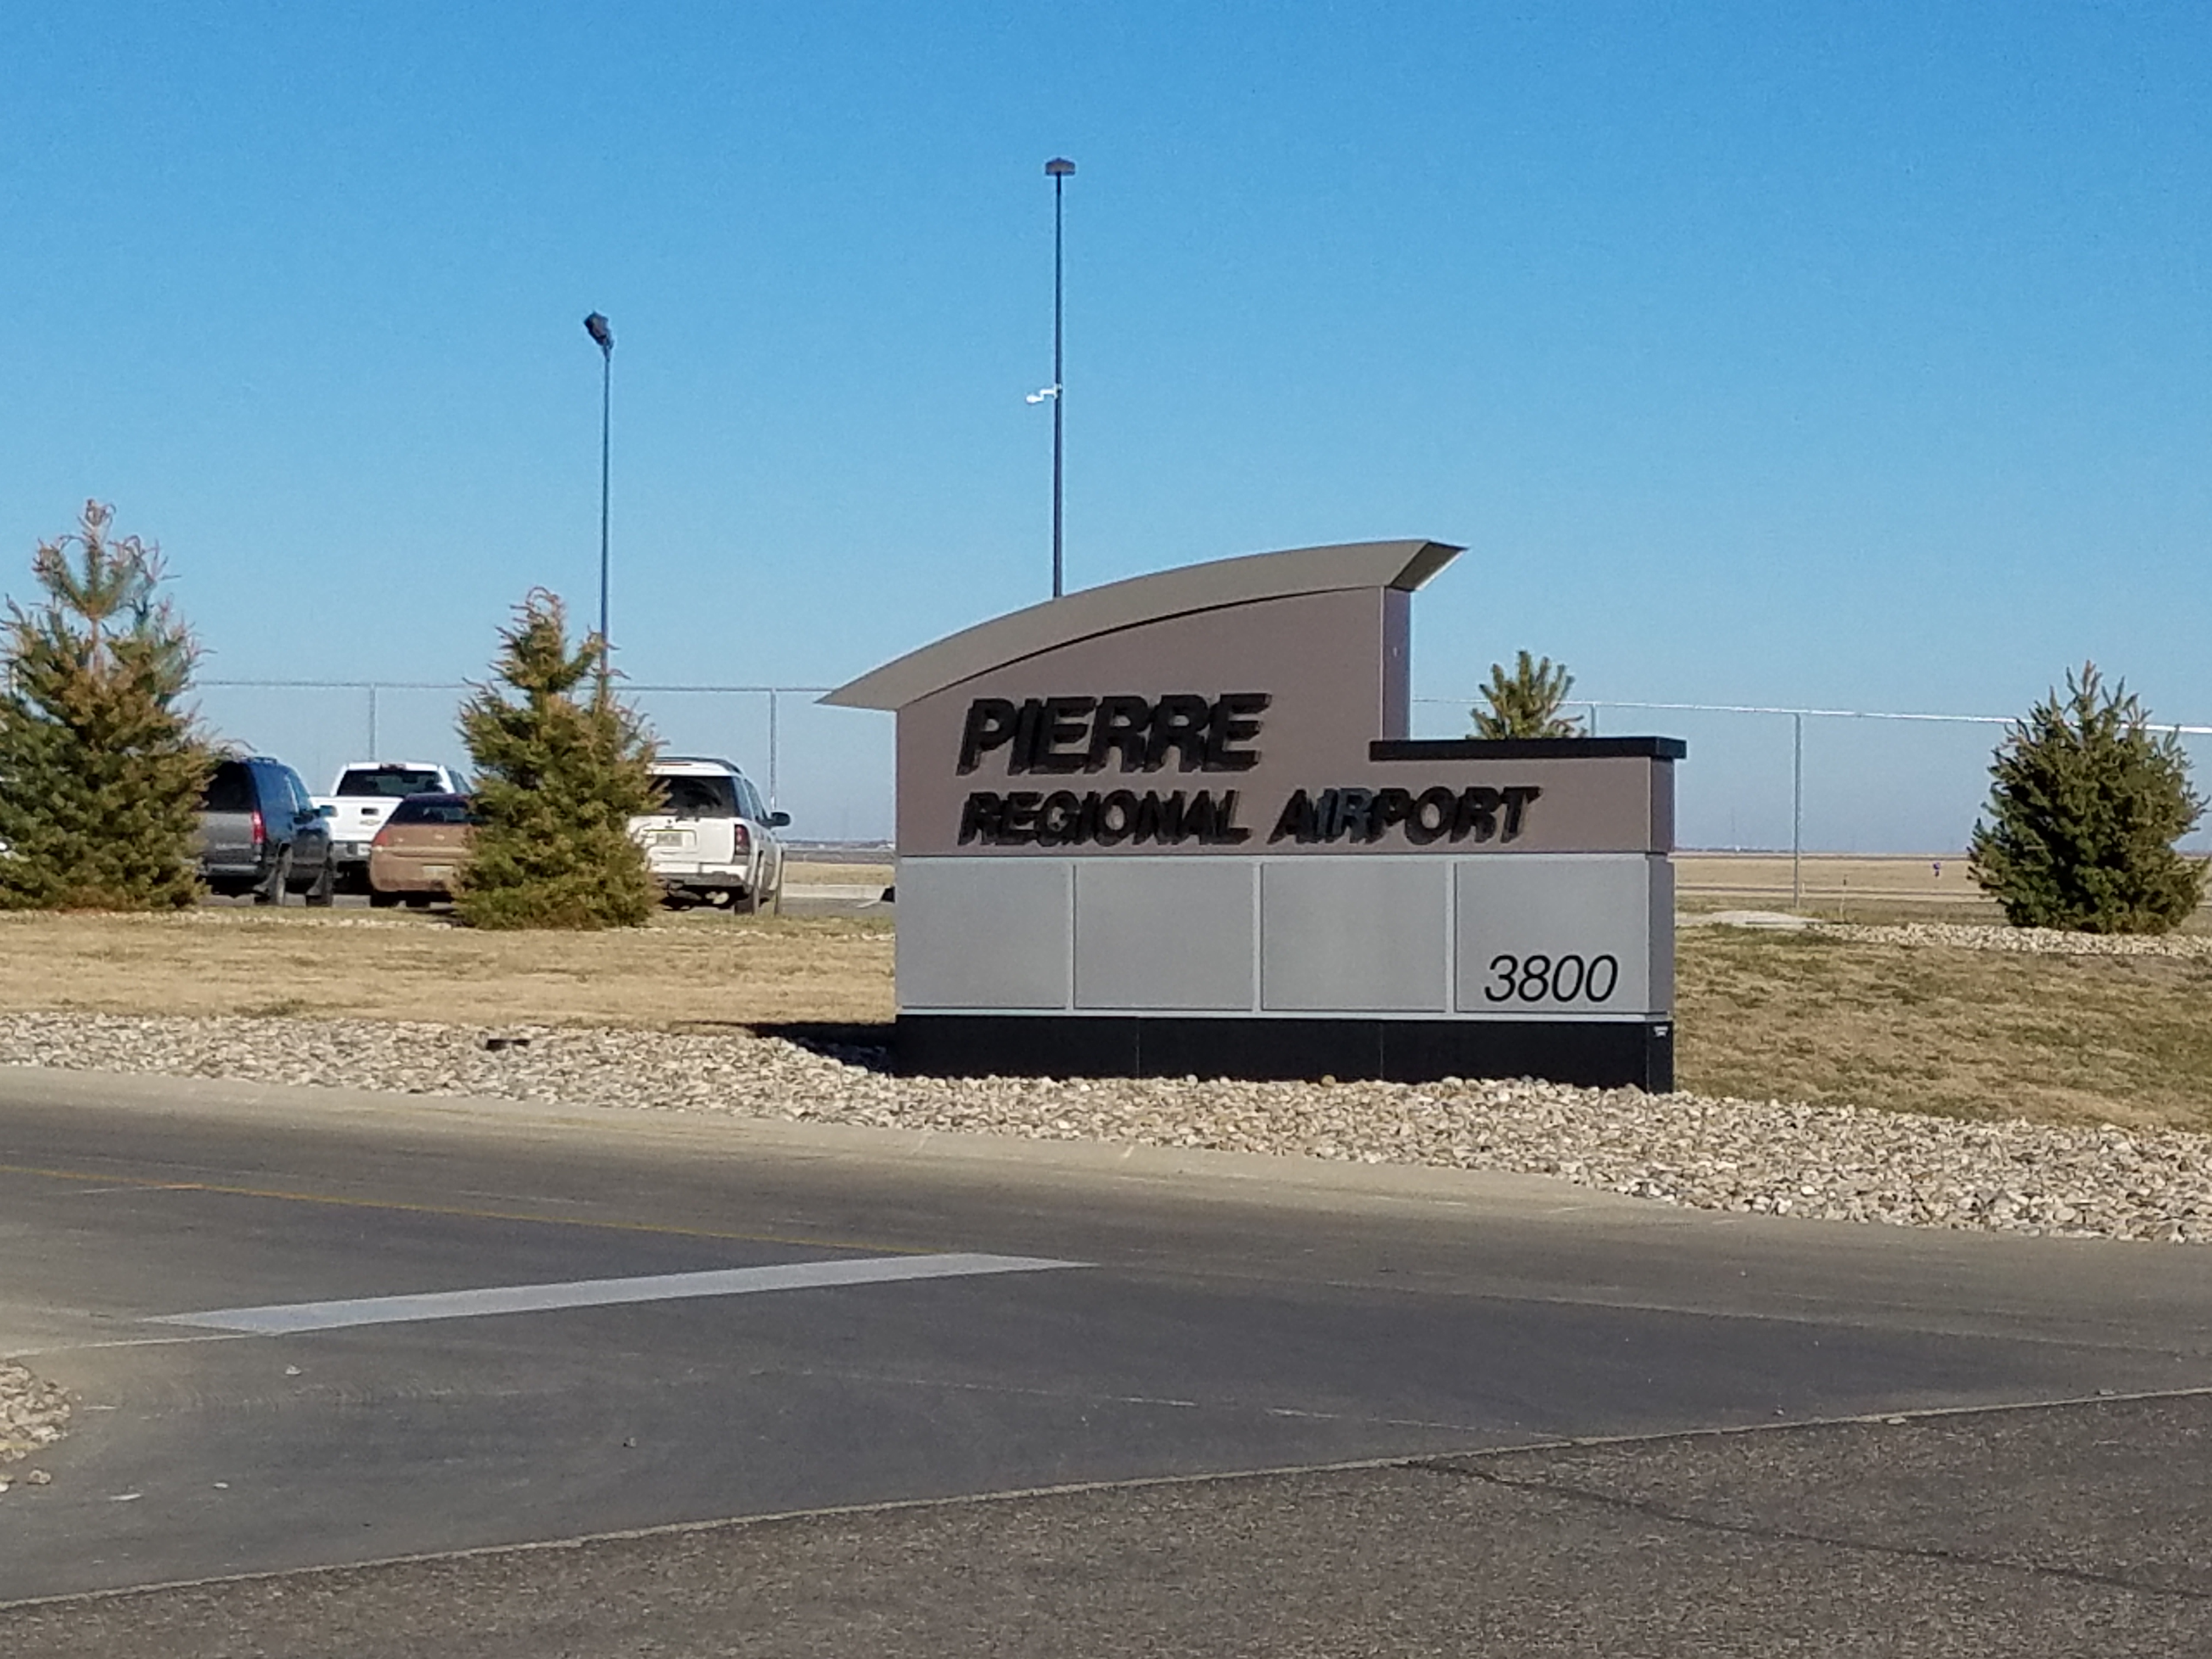 New Airport Engineer Selected For Pierre Regional Airport